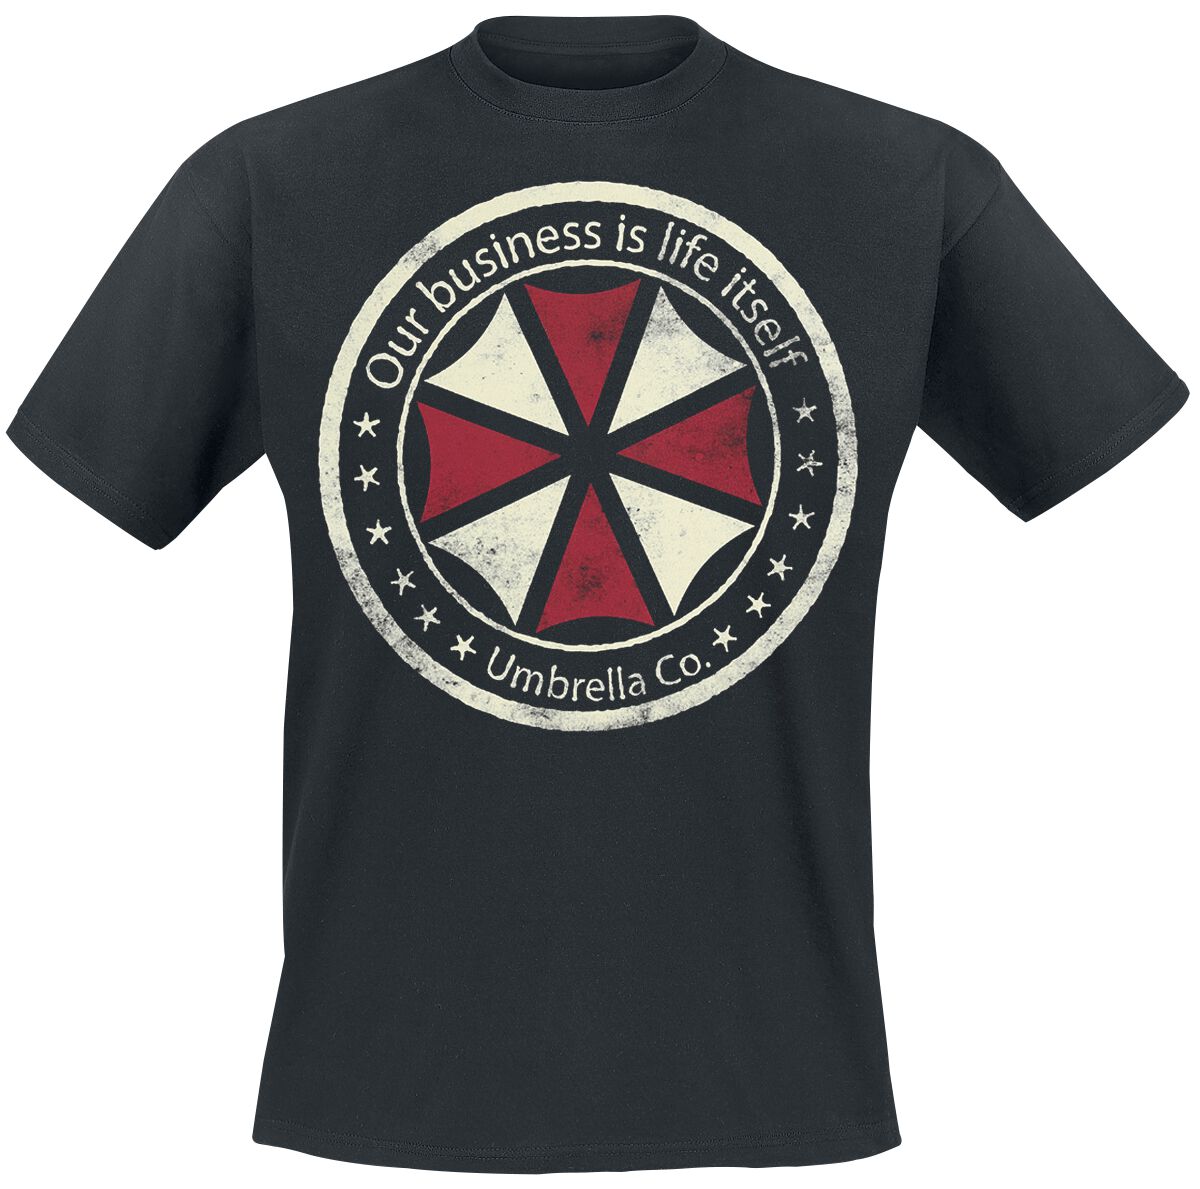 Resident Evil Umbrella Co. - Our Business Is Life Itself T-Shirt schwarz in M von Resident Evil